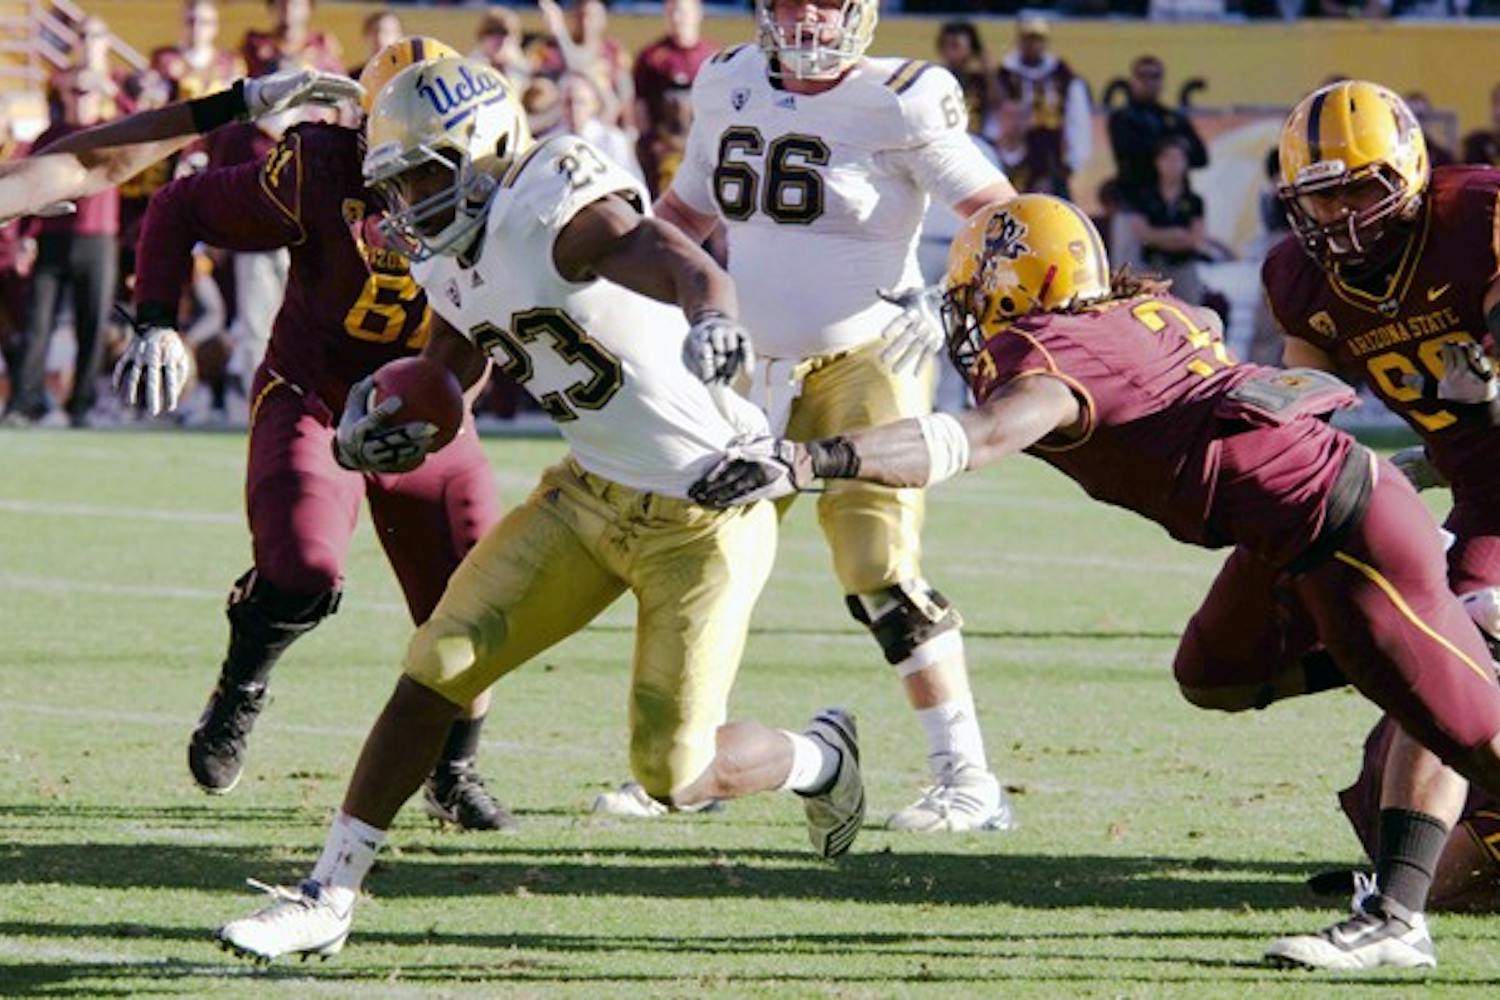 GREAT LENGTHS: Redshirt senior cornerback Omar Bolden reaches for a tackle against UCLA junior fullback Damien Thigpen in the Sun Devils’ meeting against the Bruins last November. Bolden’s return from an ACL tear remains uncertain despite speculation of a comeback that surfaced earlier this week. (Photo by Aaron Lavinsky)